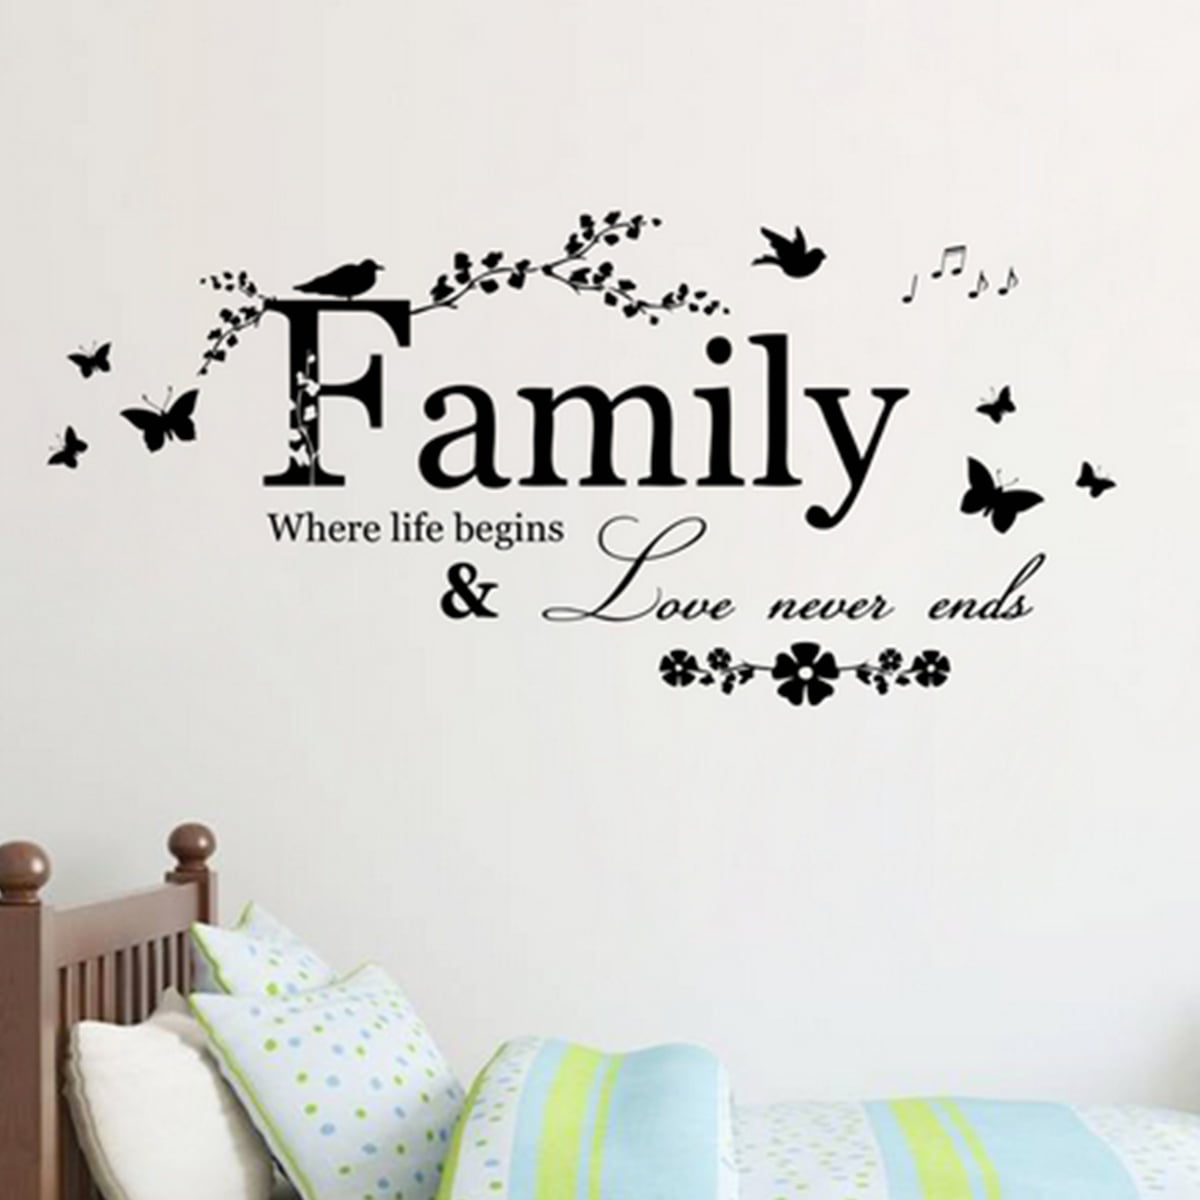 Vinyl Word Quote Art Wall Stickers Mural Home Kitchen Room Decal Decor Removable